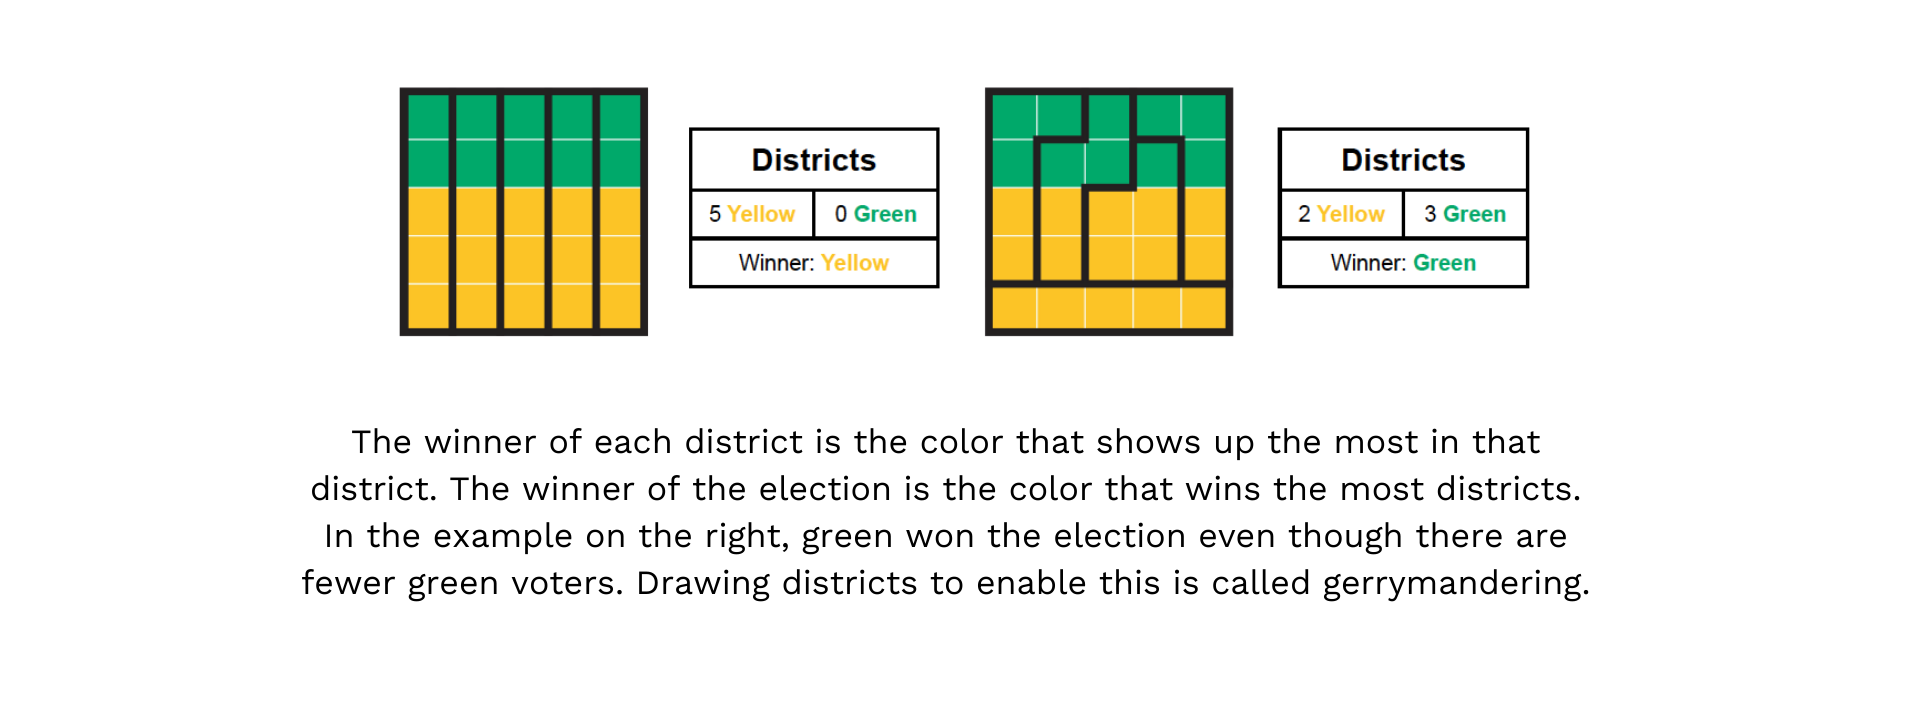 The winner of each district is the color that shows up the most in that district. The winner of the election is the color that wins the most districts. In the example on the right, green won the election even though there are fewer green voters. Drawing districts to enable this is called gerrymandering.